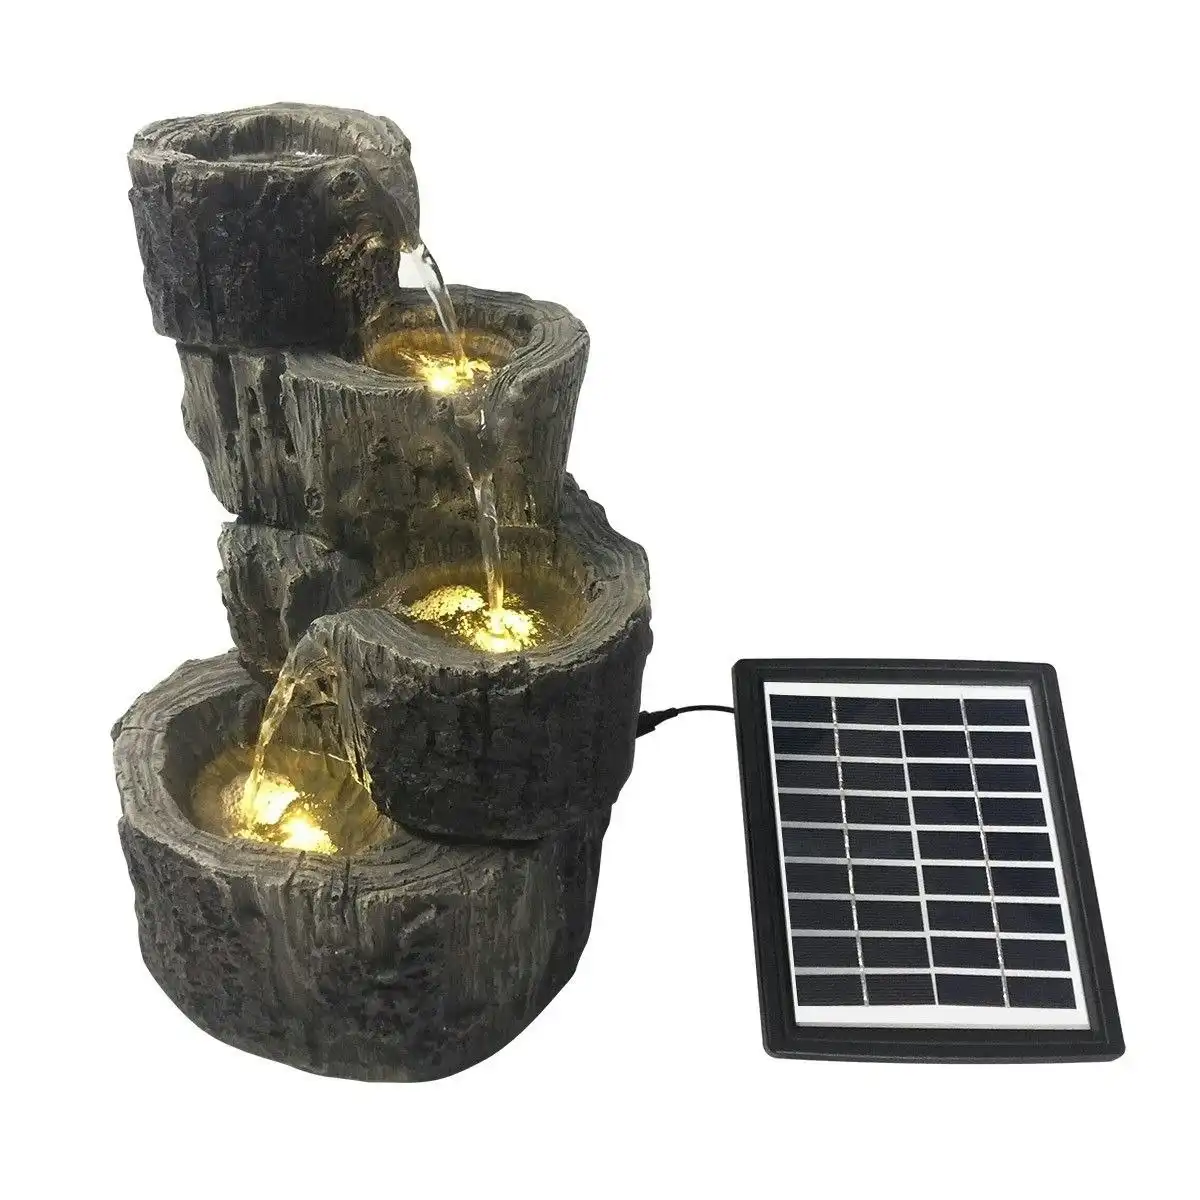 Ausway Solar Panel Powered Water Fountain Garden Features Outdoor Bird Bath 4 Tiers With Led Light